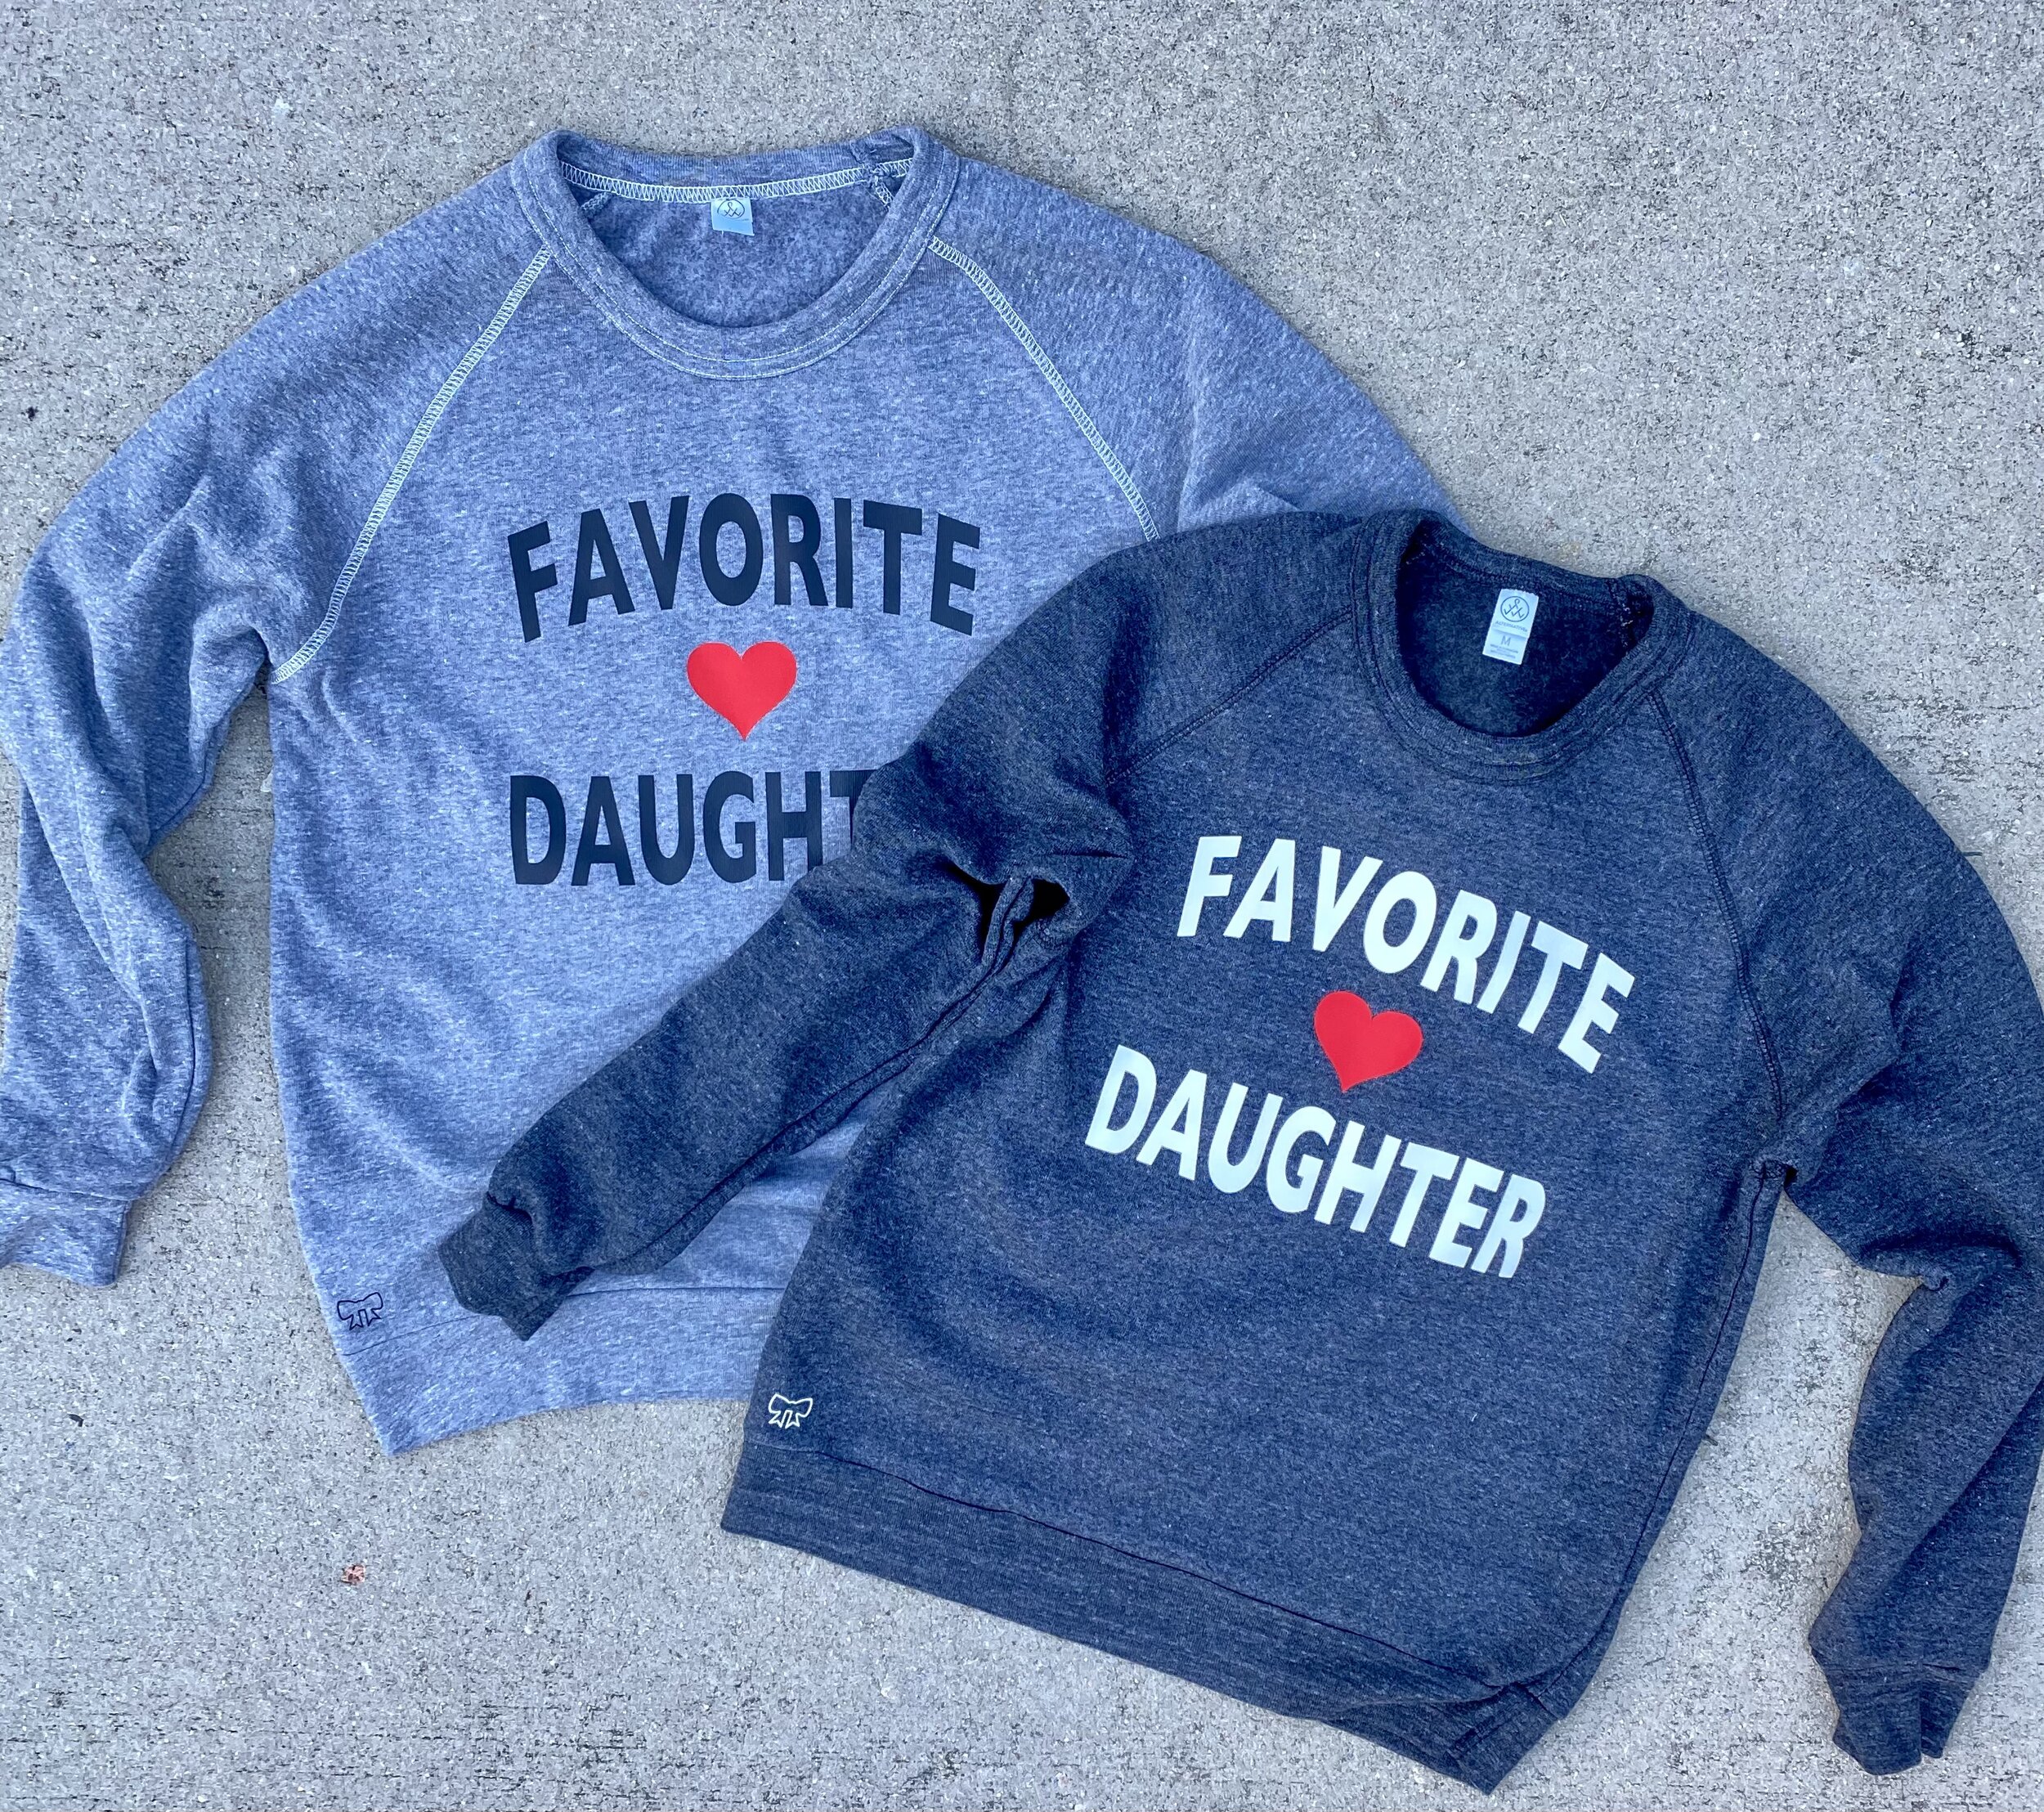 Favorite Daughter soft and comfy t-shirt